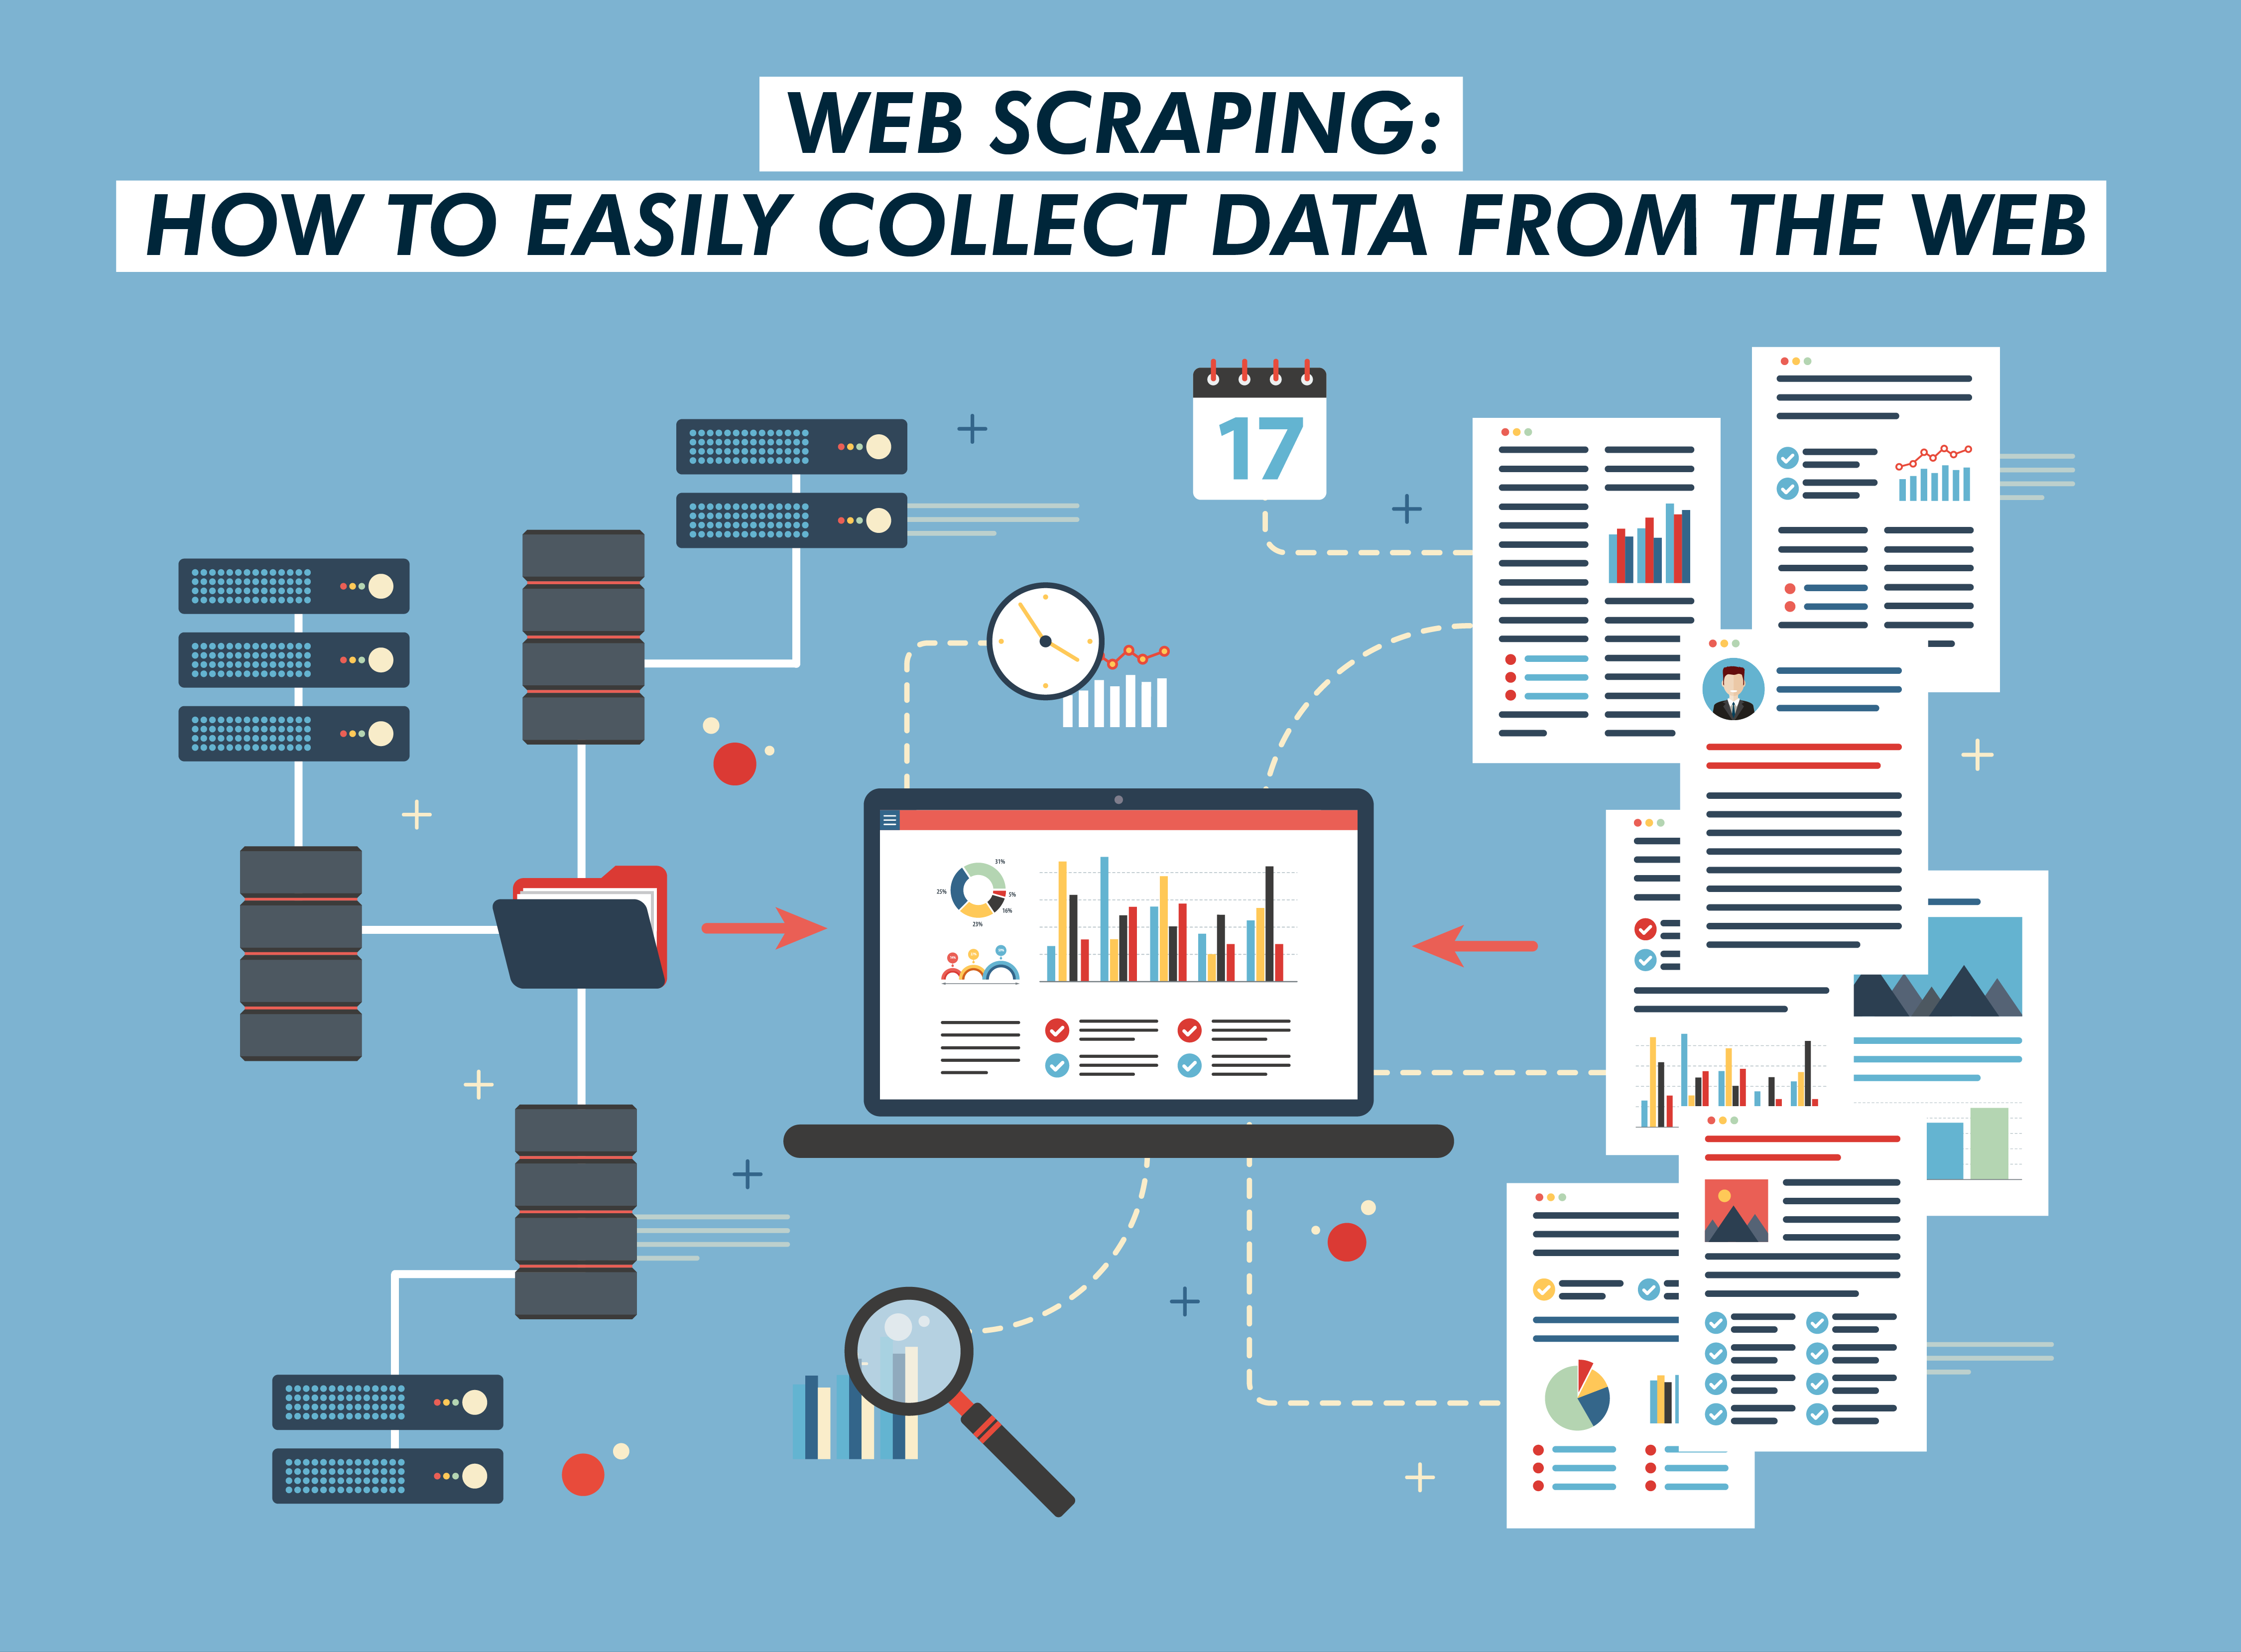 "Web Scraping: How to Easily Collect Data from the Web," depicting various elements such as servers, documents, and charts to illustrate the process of gathering data from the internet.